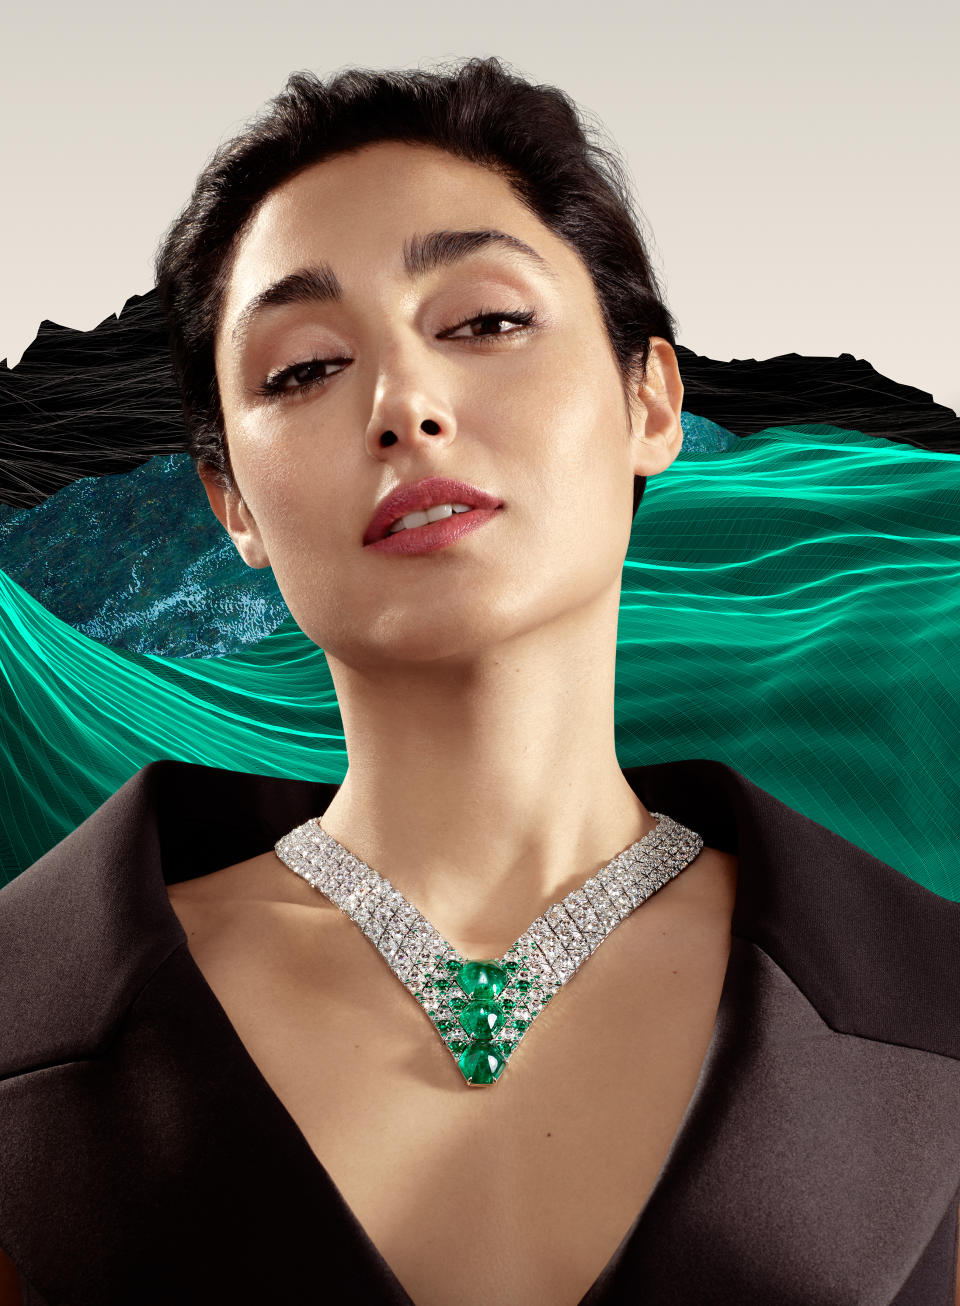 Golshifteh Farahani models the Iwara necklace from Cartier’s “Beautés du monde” high jewelry collection. - Credit: Courtesy of Cartier